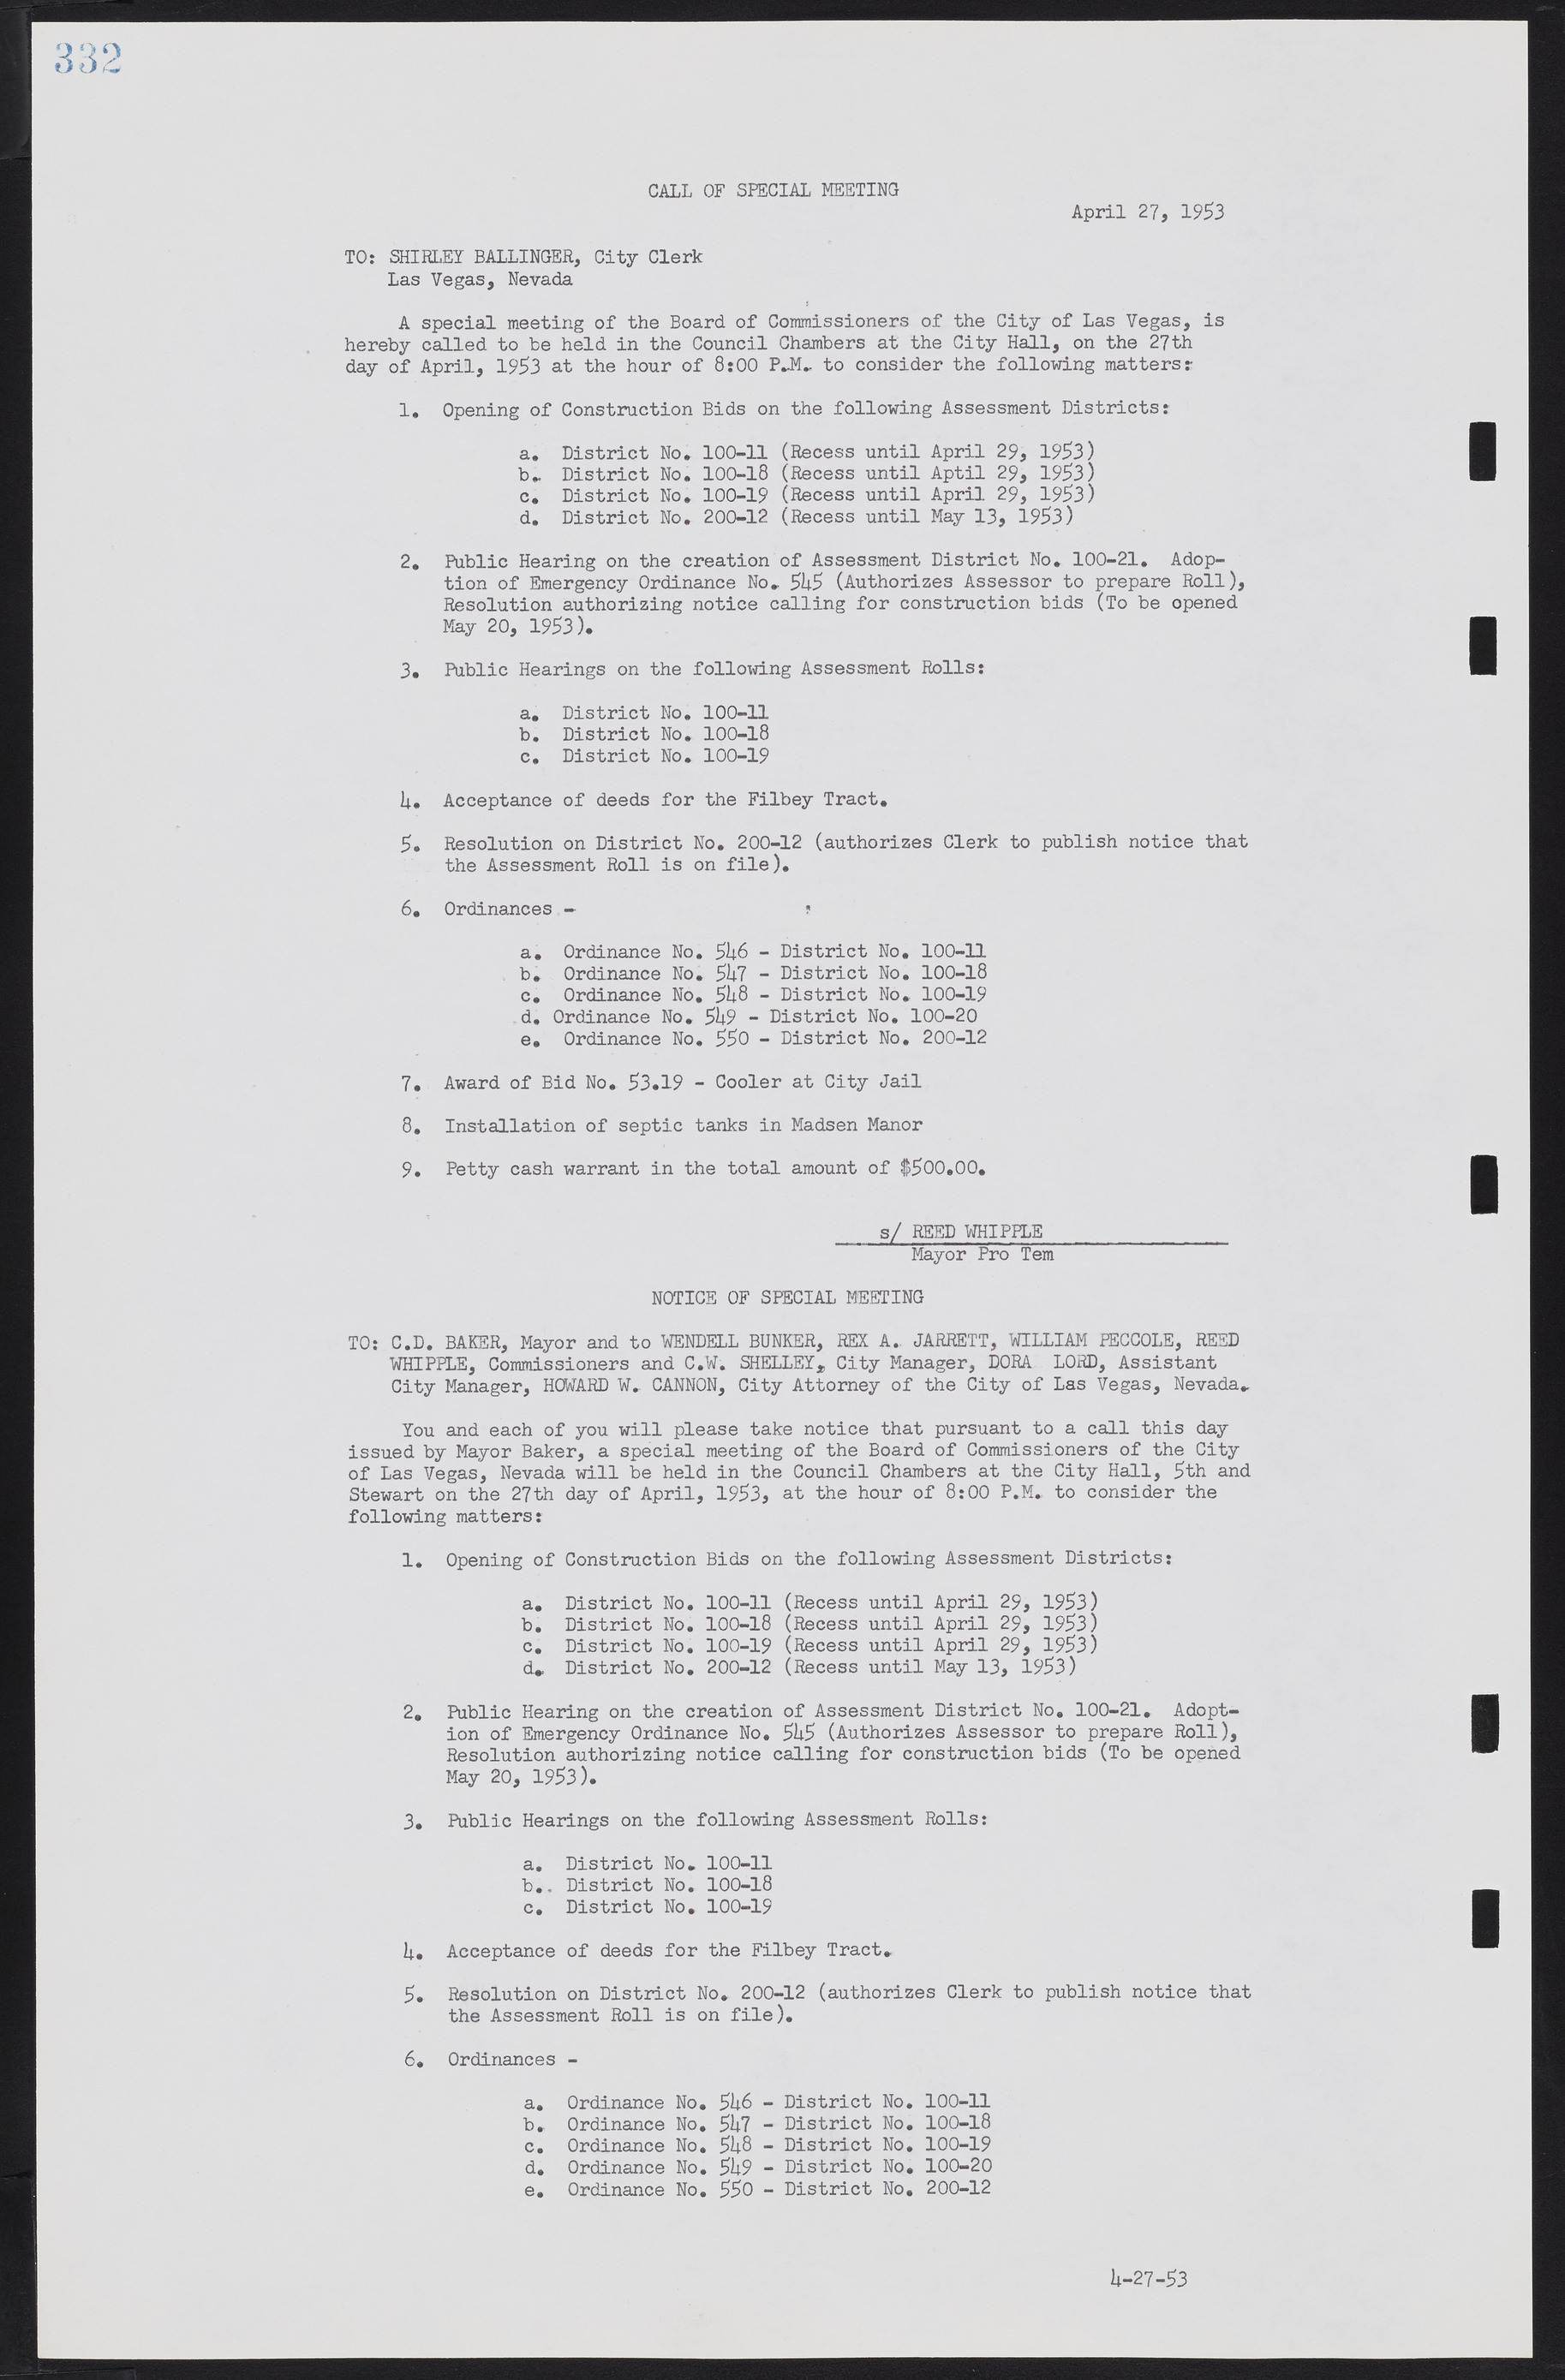 Las Vegas City Commission Minutes, May 26, 1952 to February 17, 1954, lvc000008-360